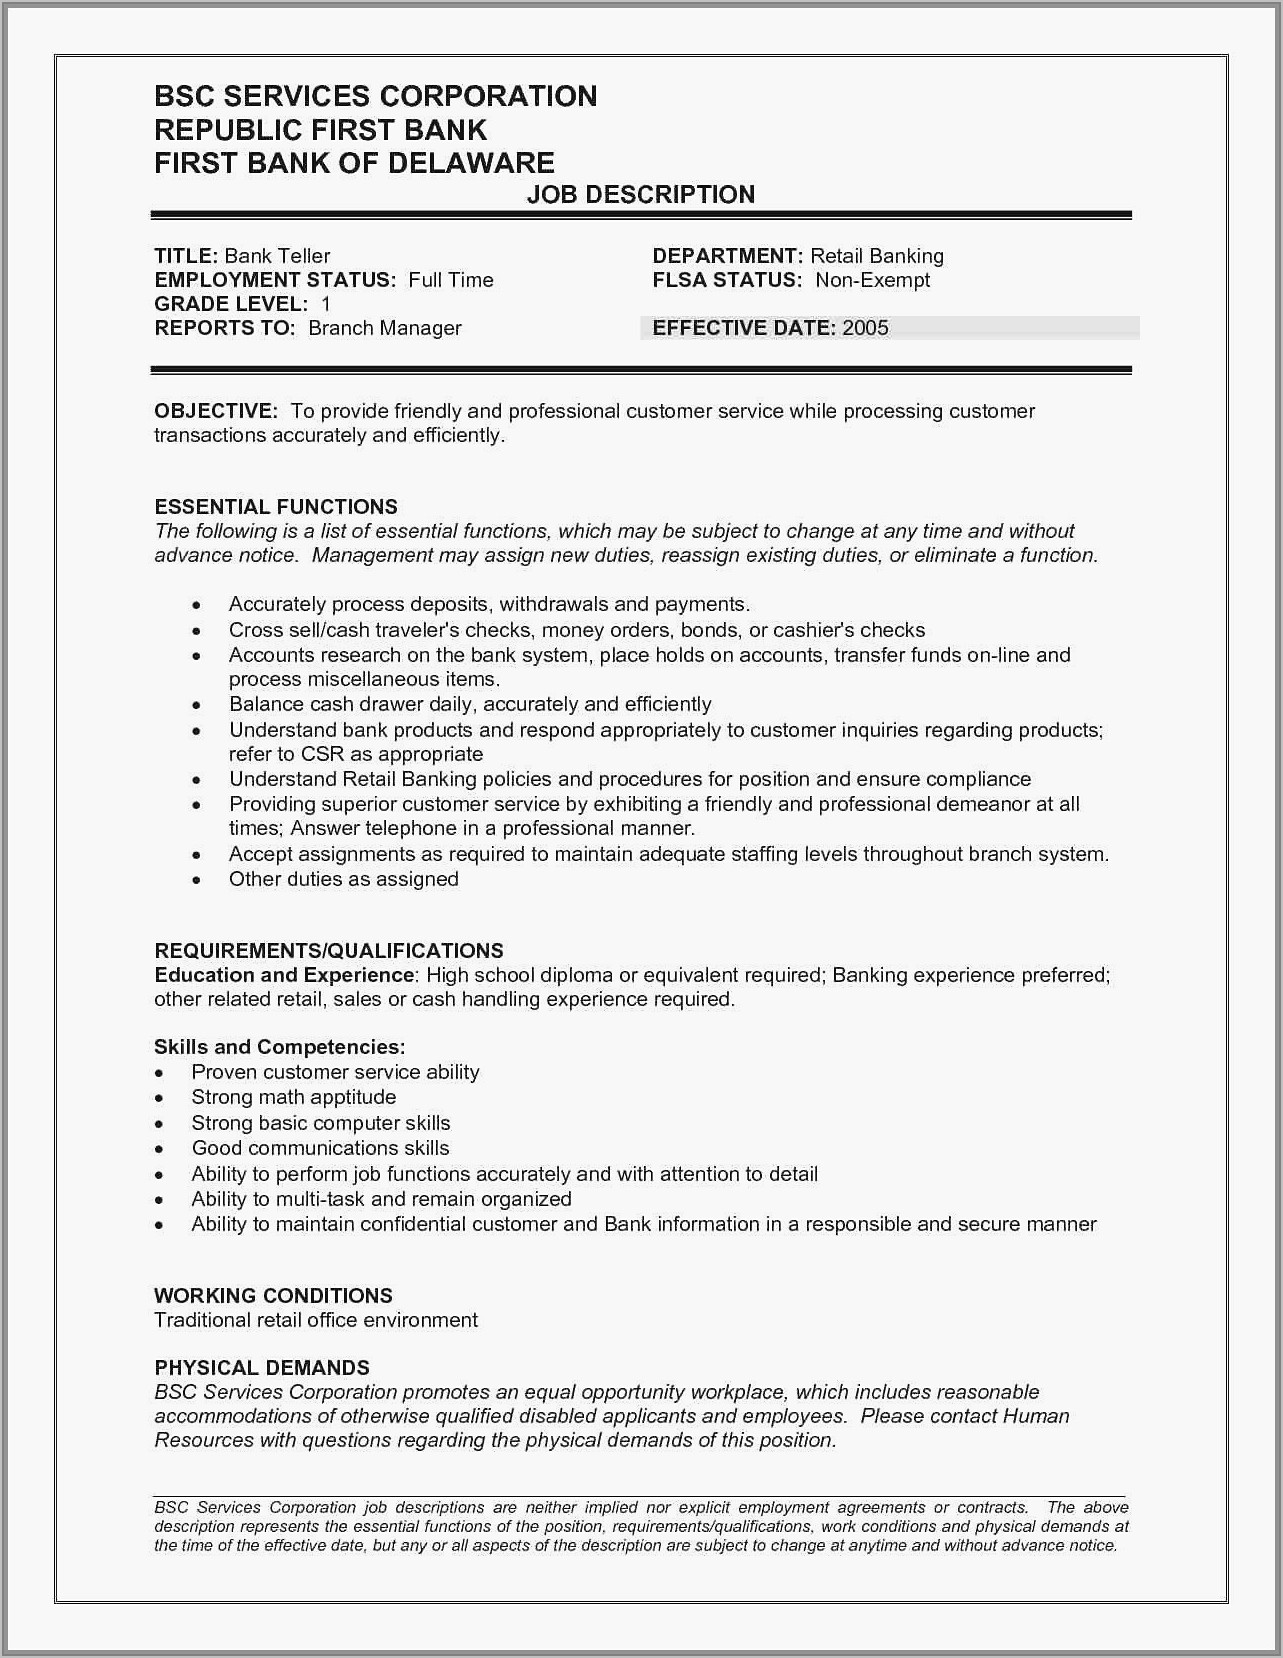 Resume For Sales Manager In Banking